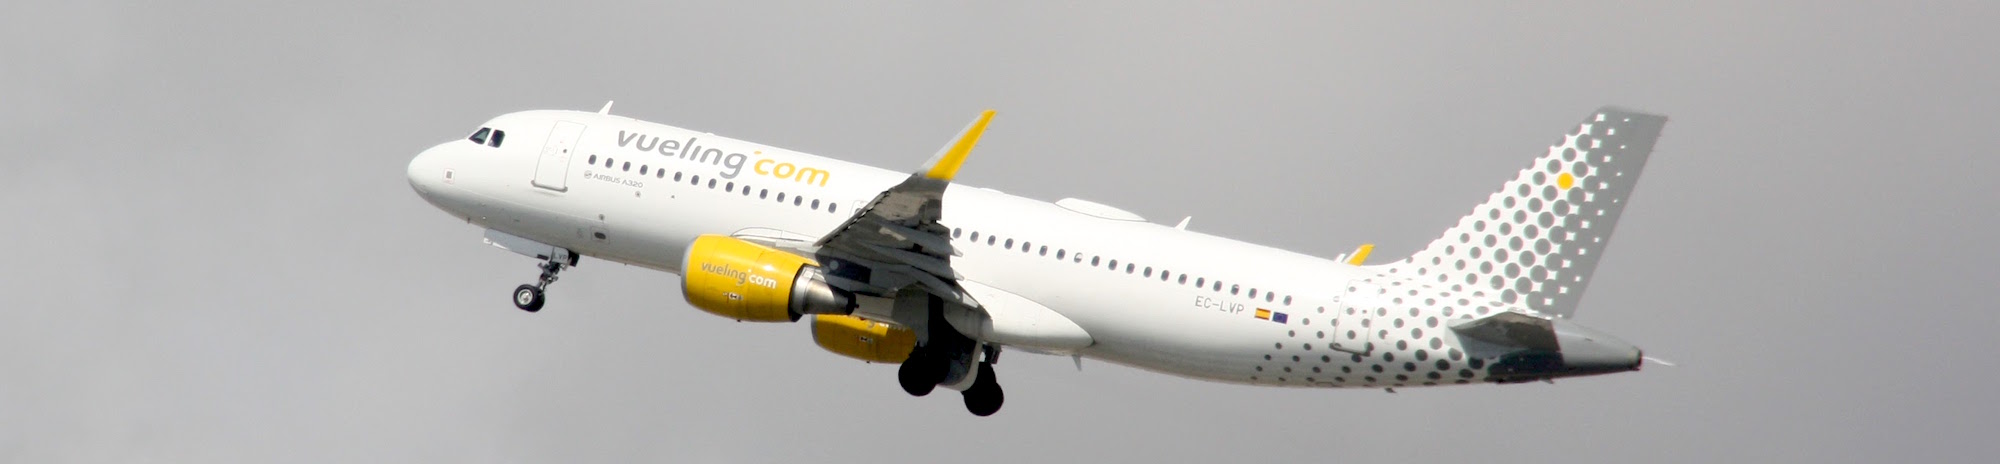 Best time to book flights for Dublin (DUB) to Ibiza (IBZ) flights with Vueling at AirHint